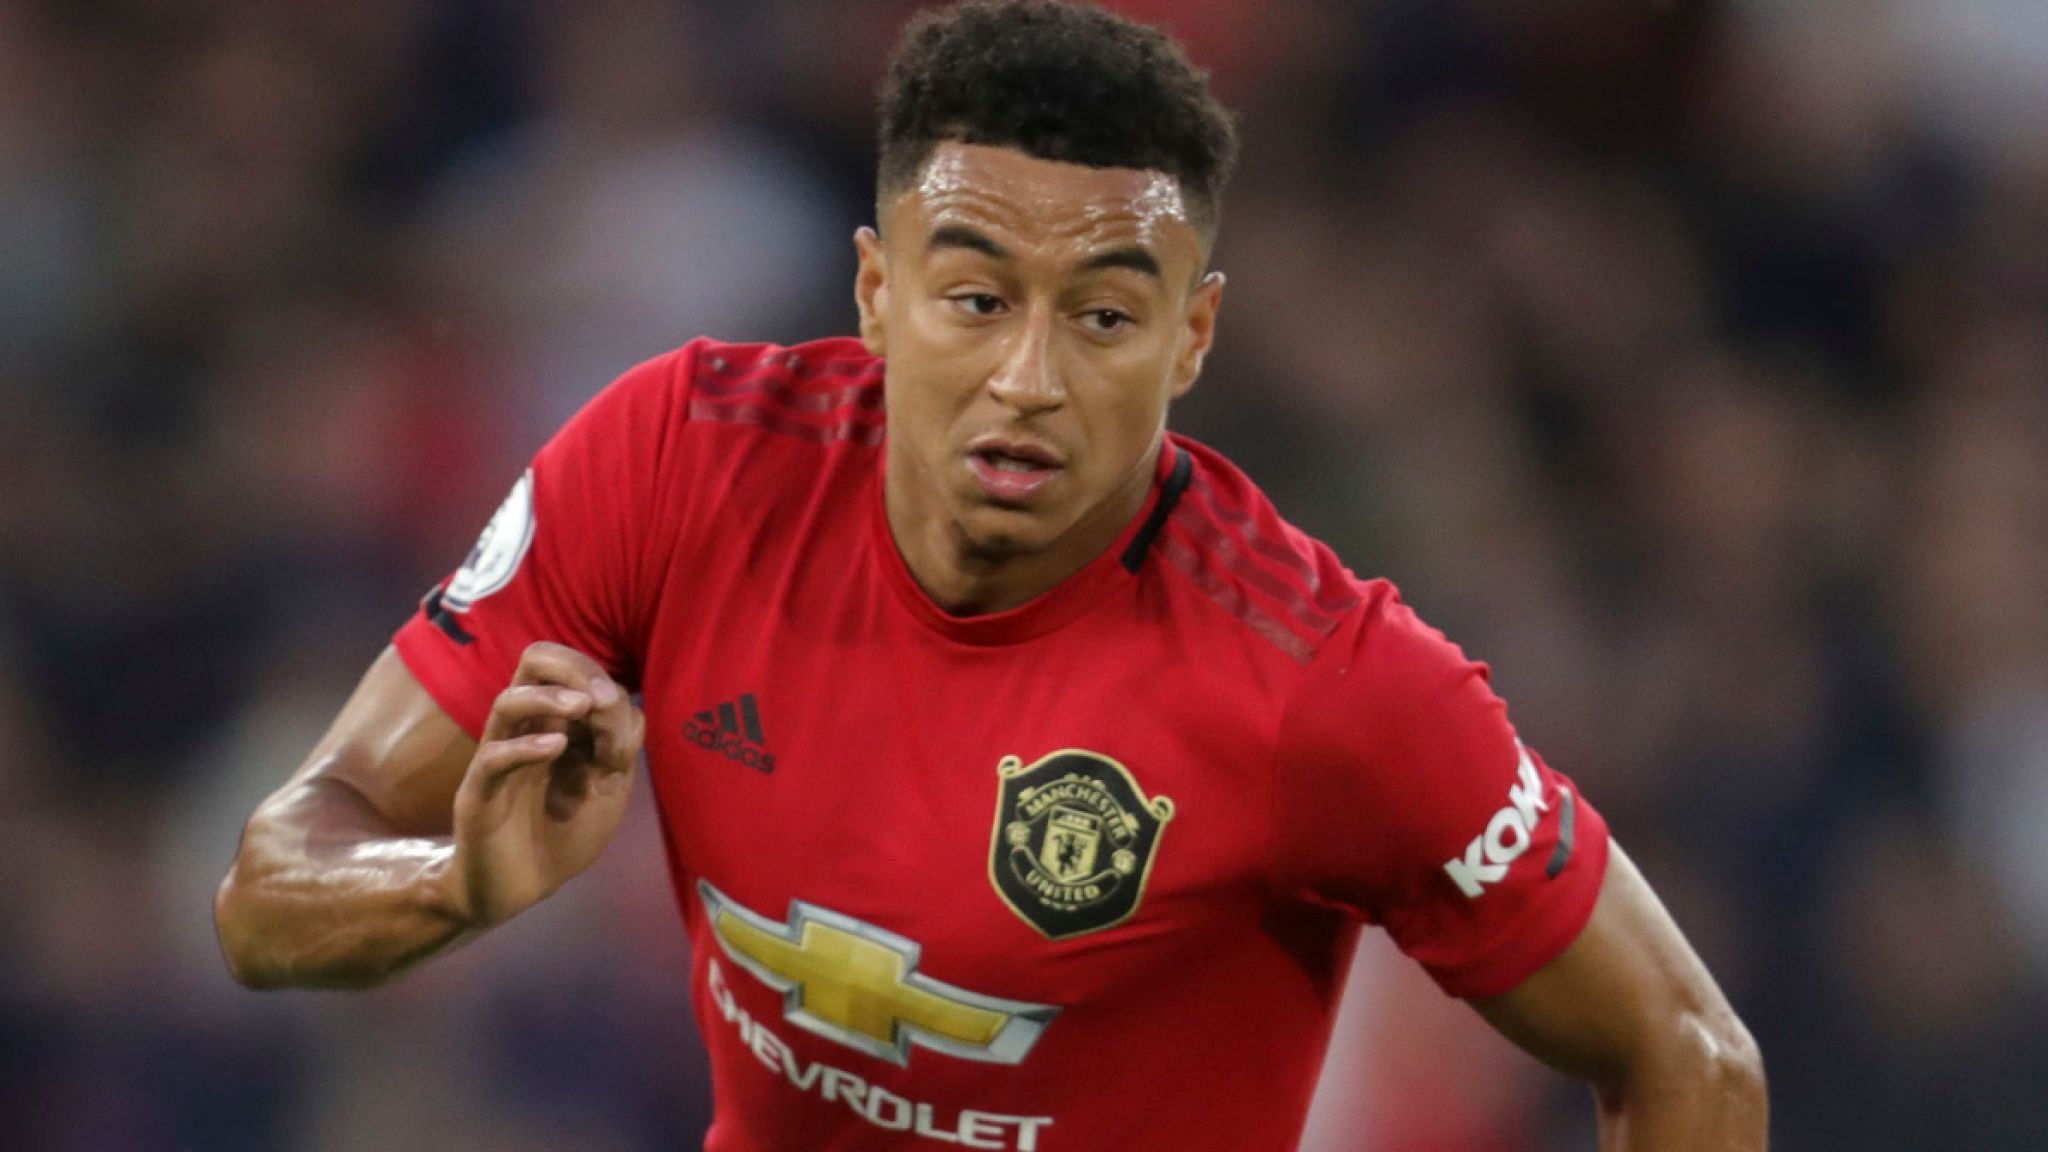 up to five players could leave man utd in summer - Bóng Đá